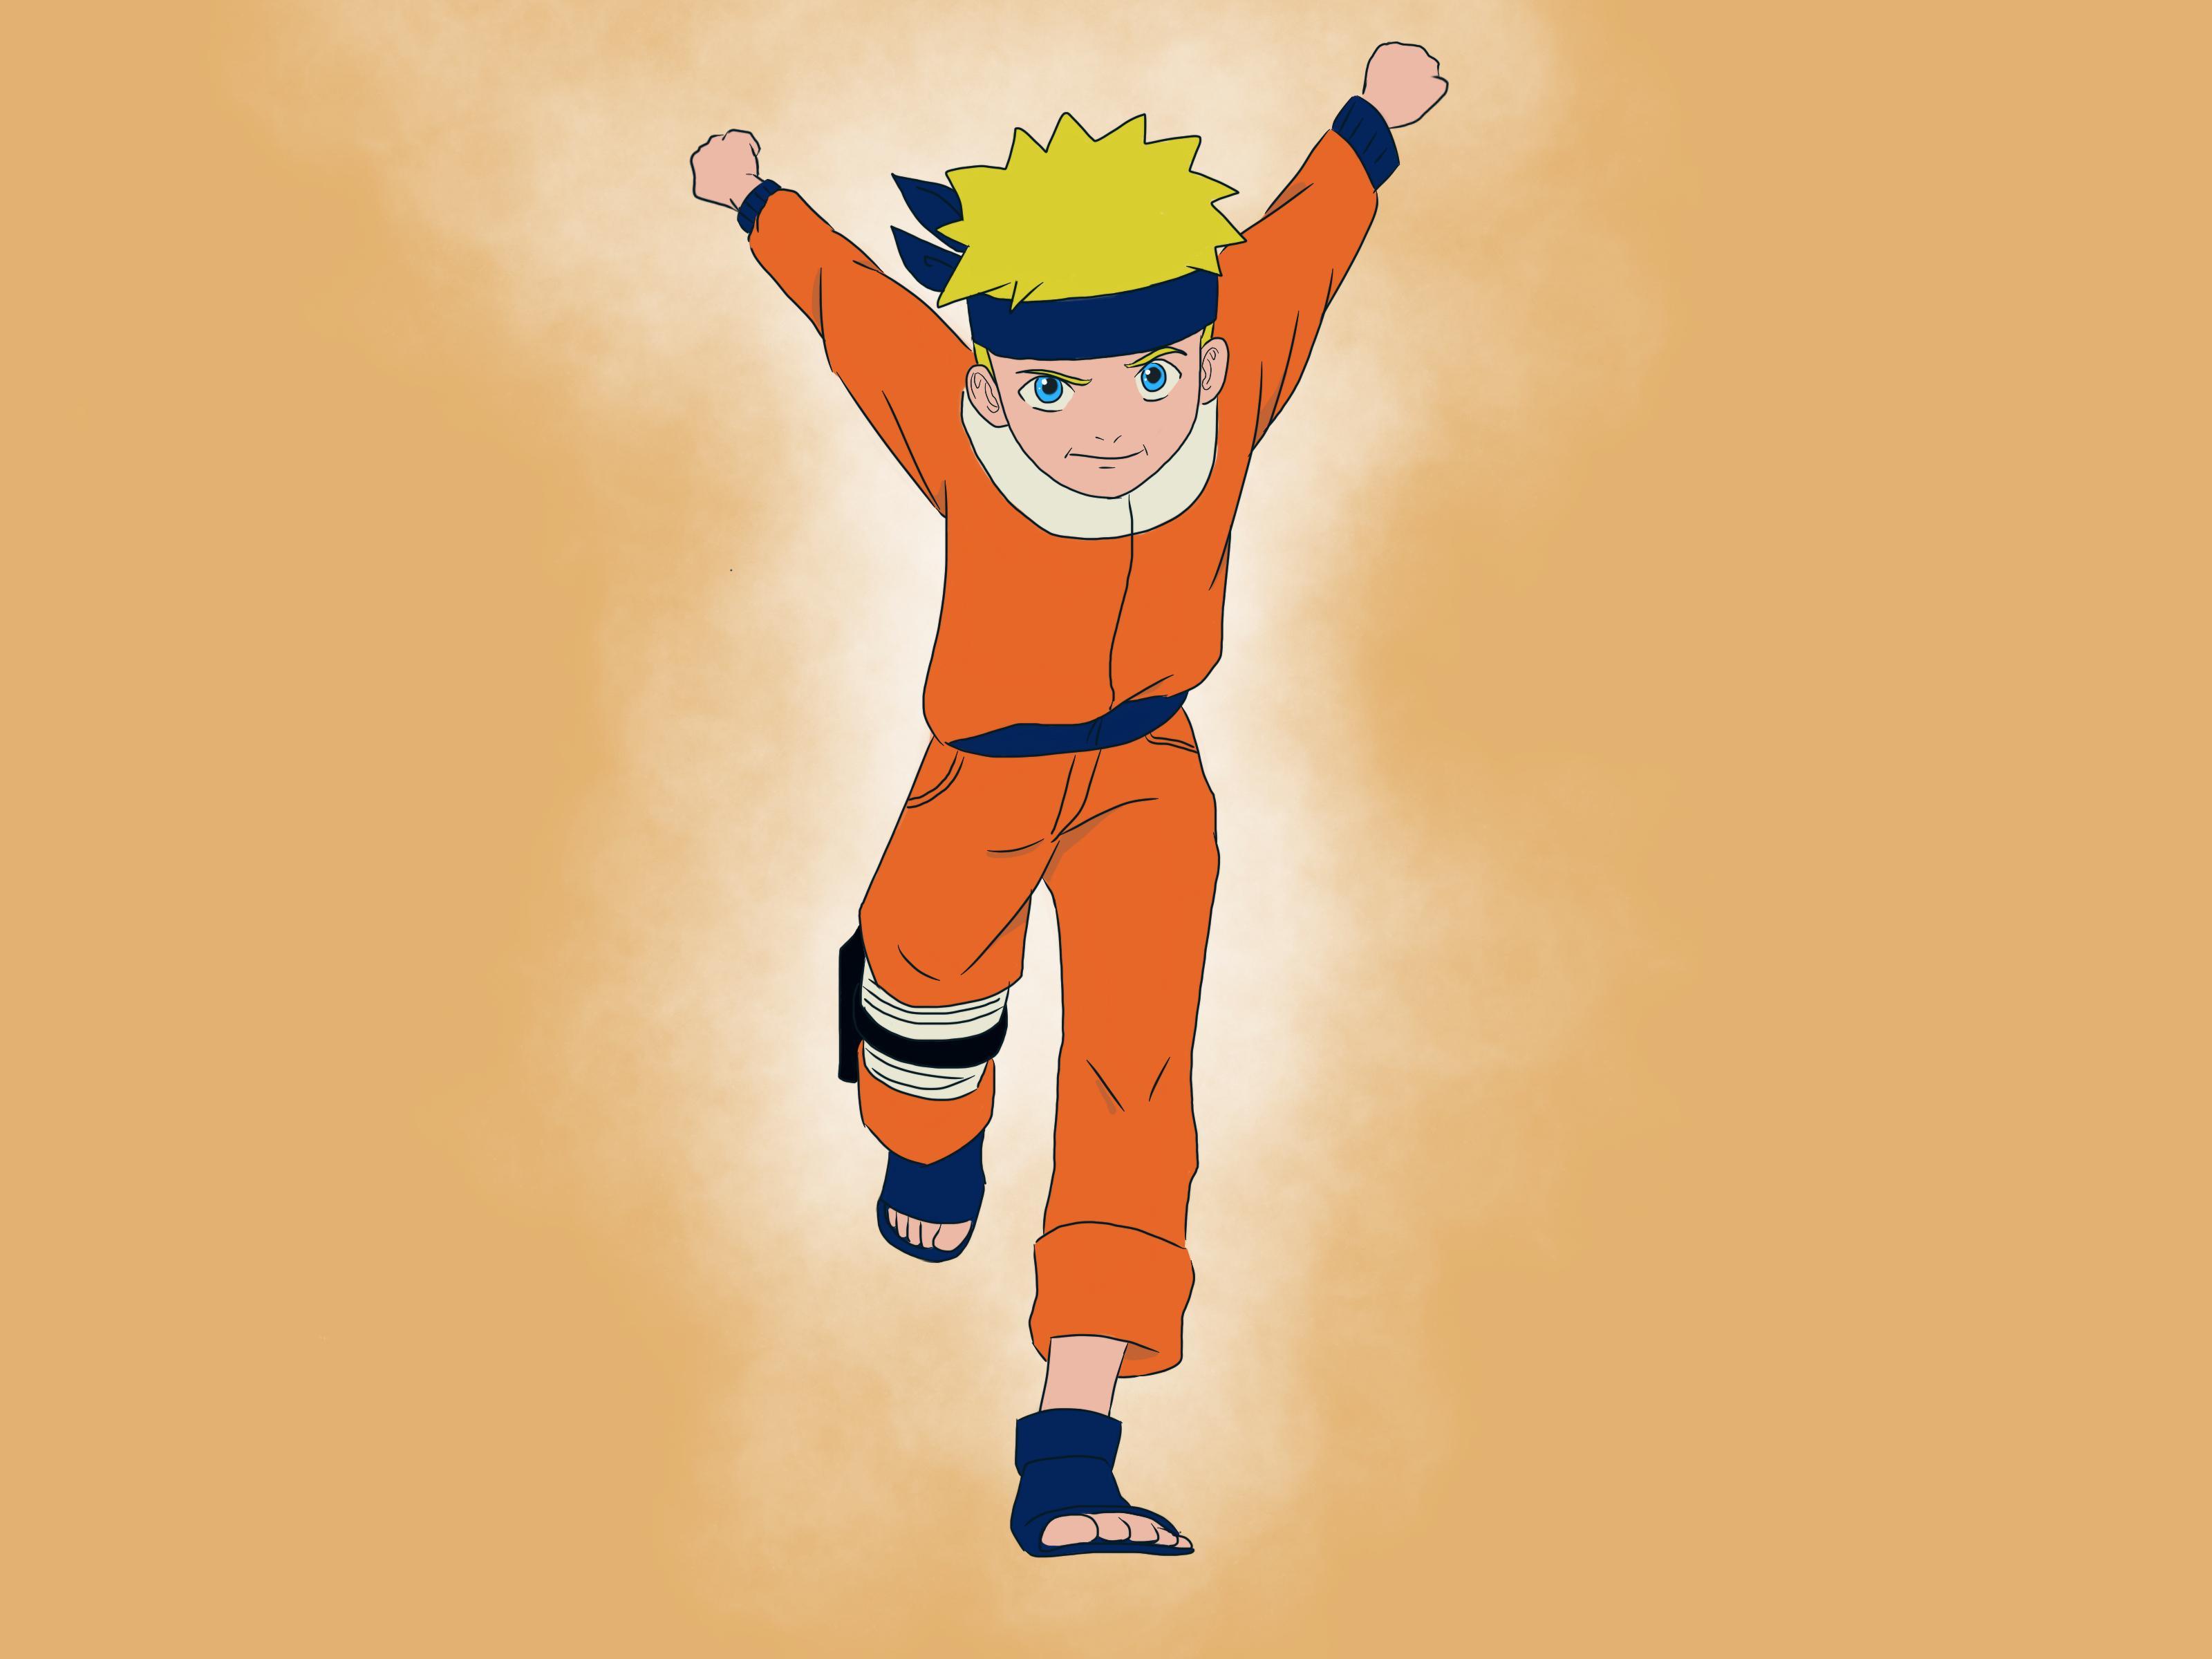 Comment courir comme Naruto: 7 étapes